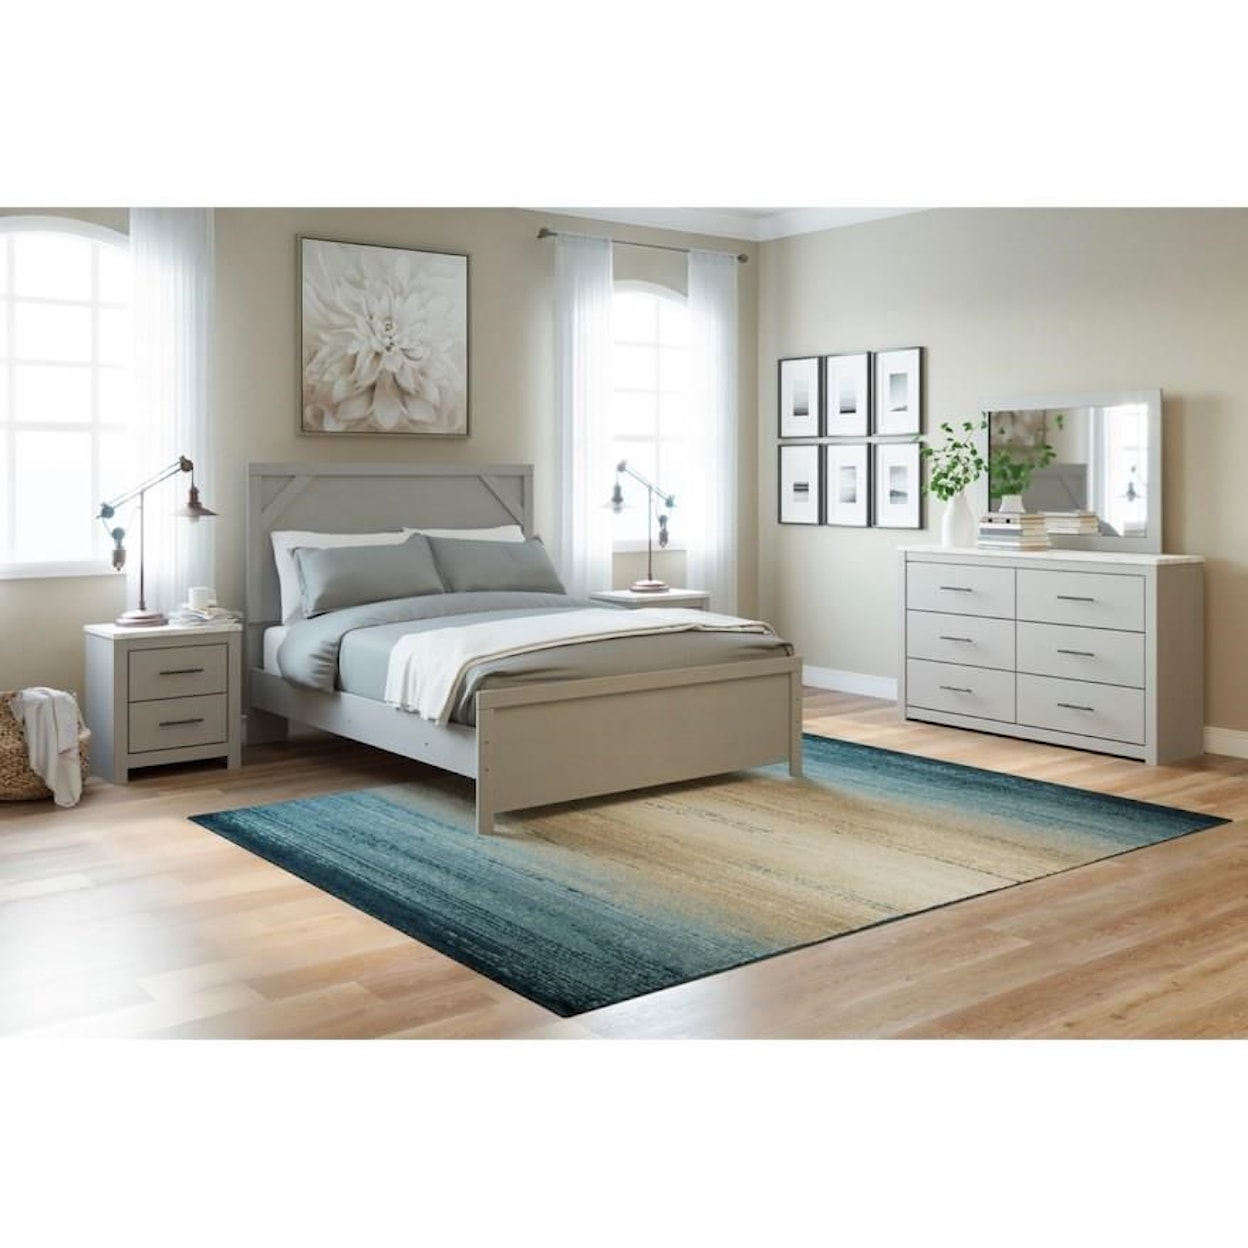 Signature Design by Ashley Cottonburg 5pc Queen Bedroom Group